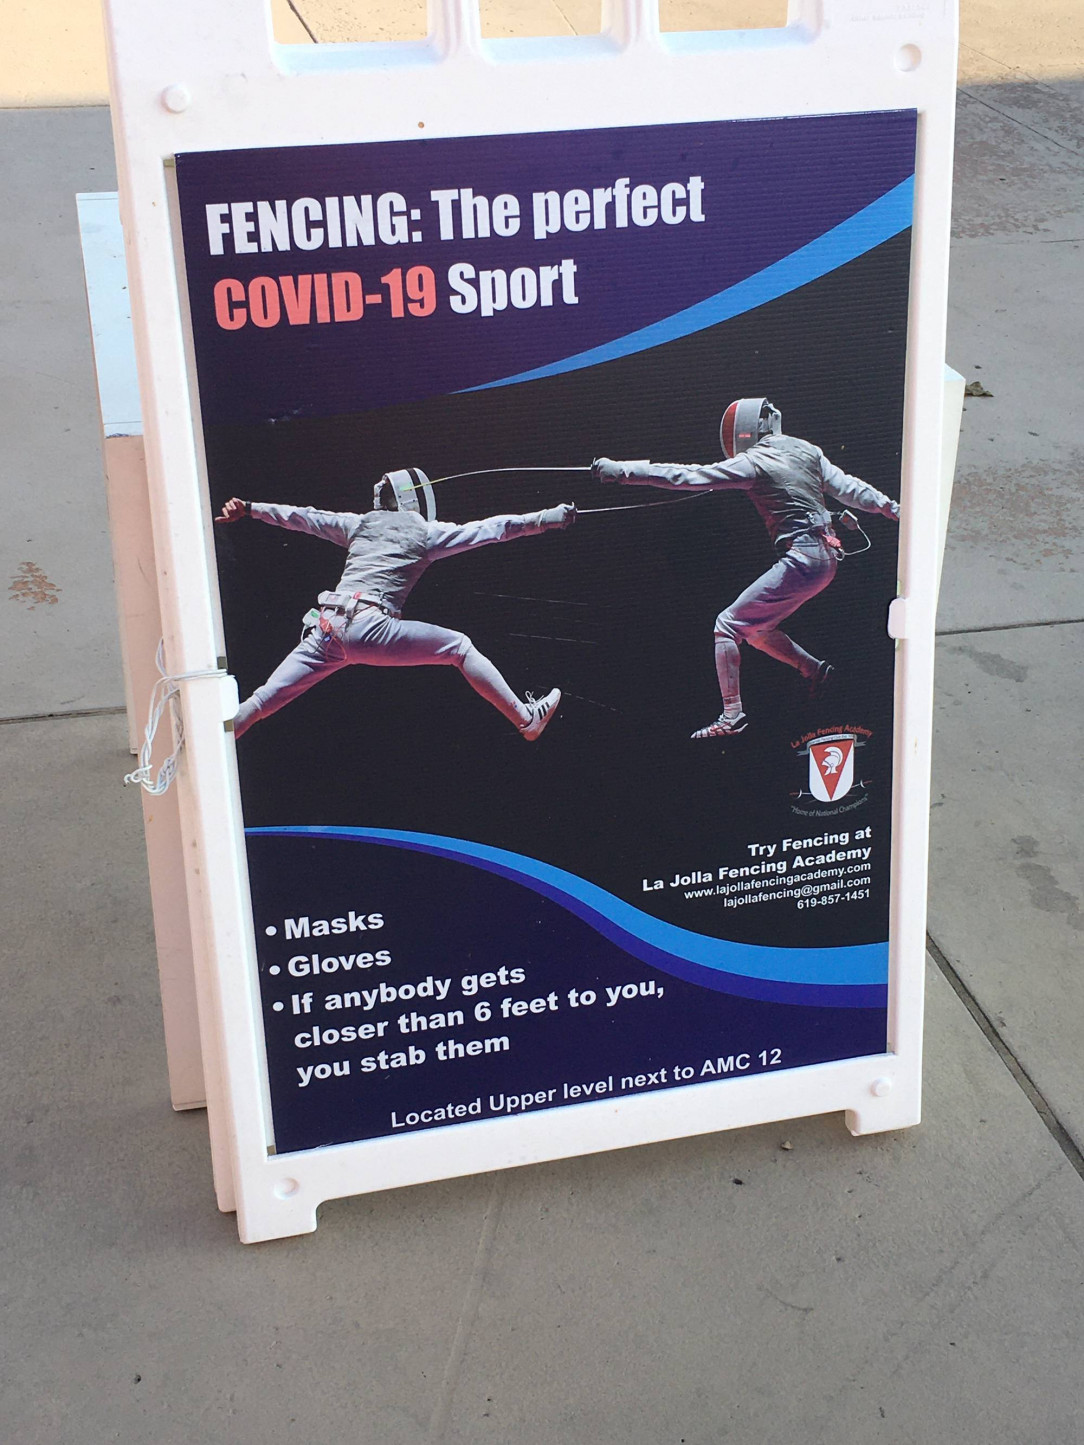 Fencing: the perfect COVID-19 sport